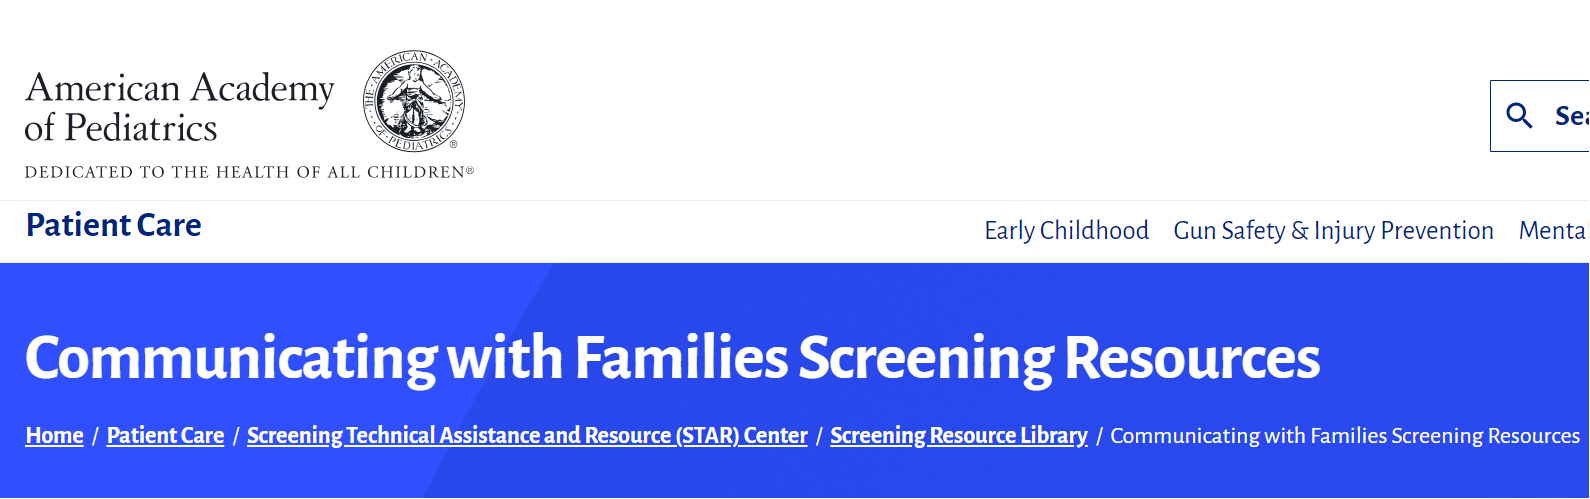 Screenshot from American Academy of Pediatrics' webpage on resources for communicating with families